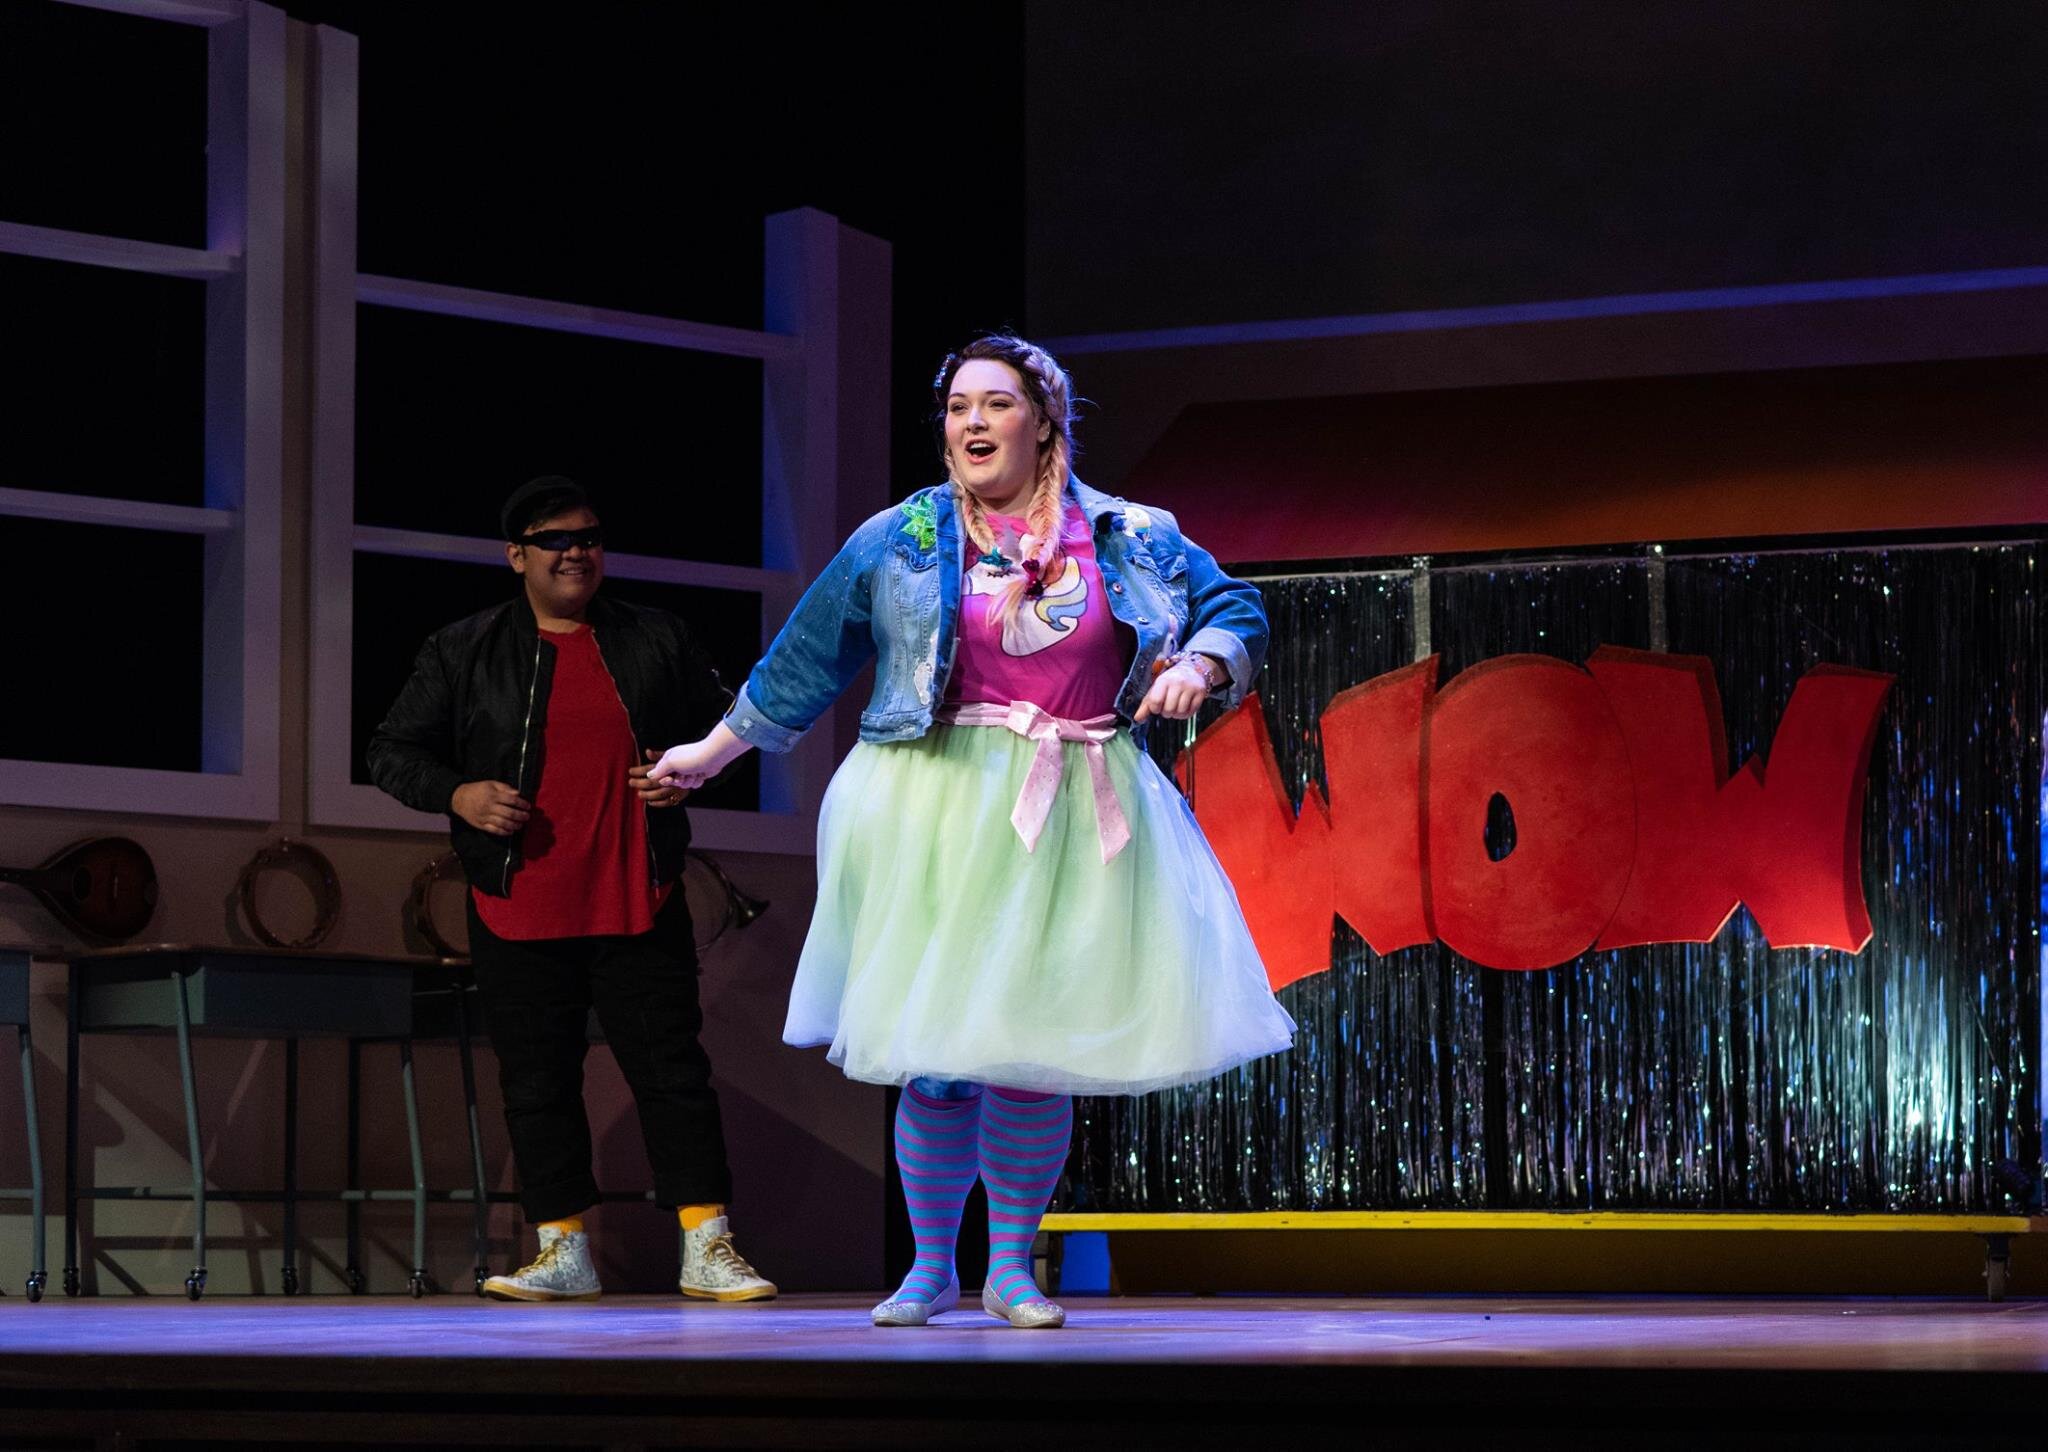  “Mezzo-soprano Simona Genga was delightful in the role of shy-girl Cindy. Her voice was round, warm and inviting, reminiscent of the scent of lilacs. Vocally she is matched to Rossini like the proverbial glass slipper.” Keira Grant,  Mooney on Theat